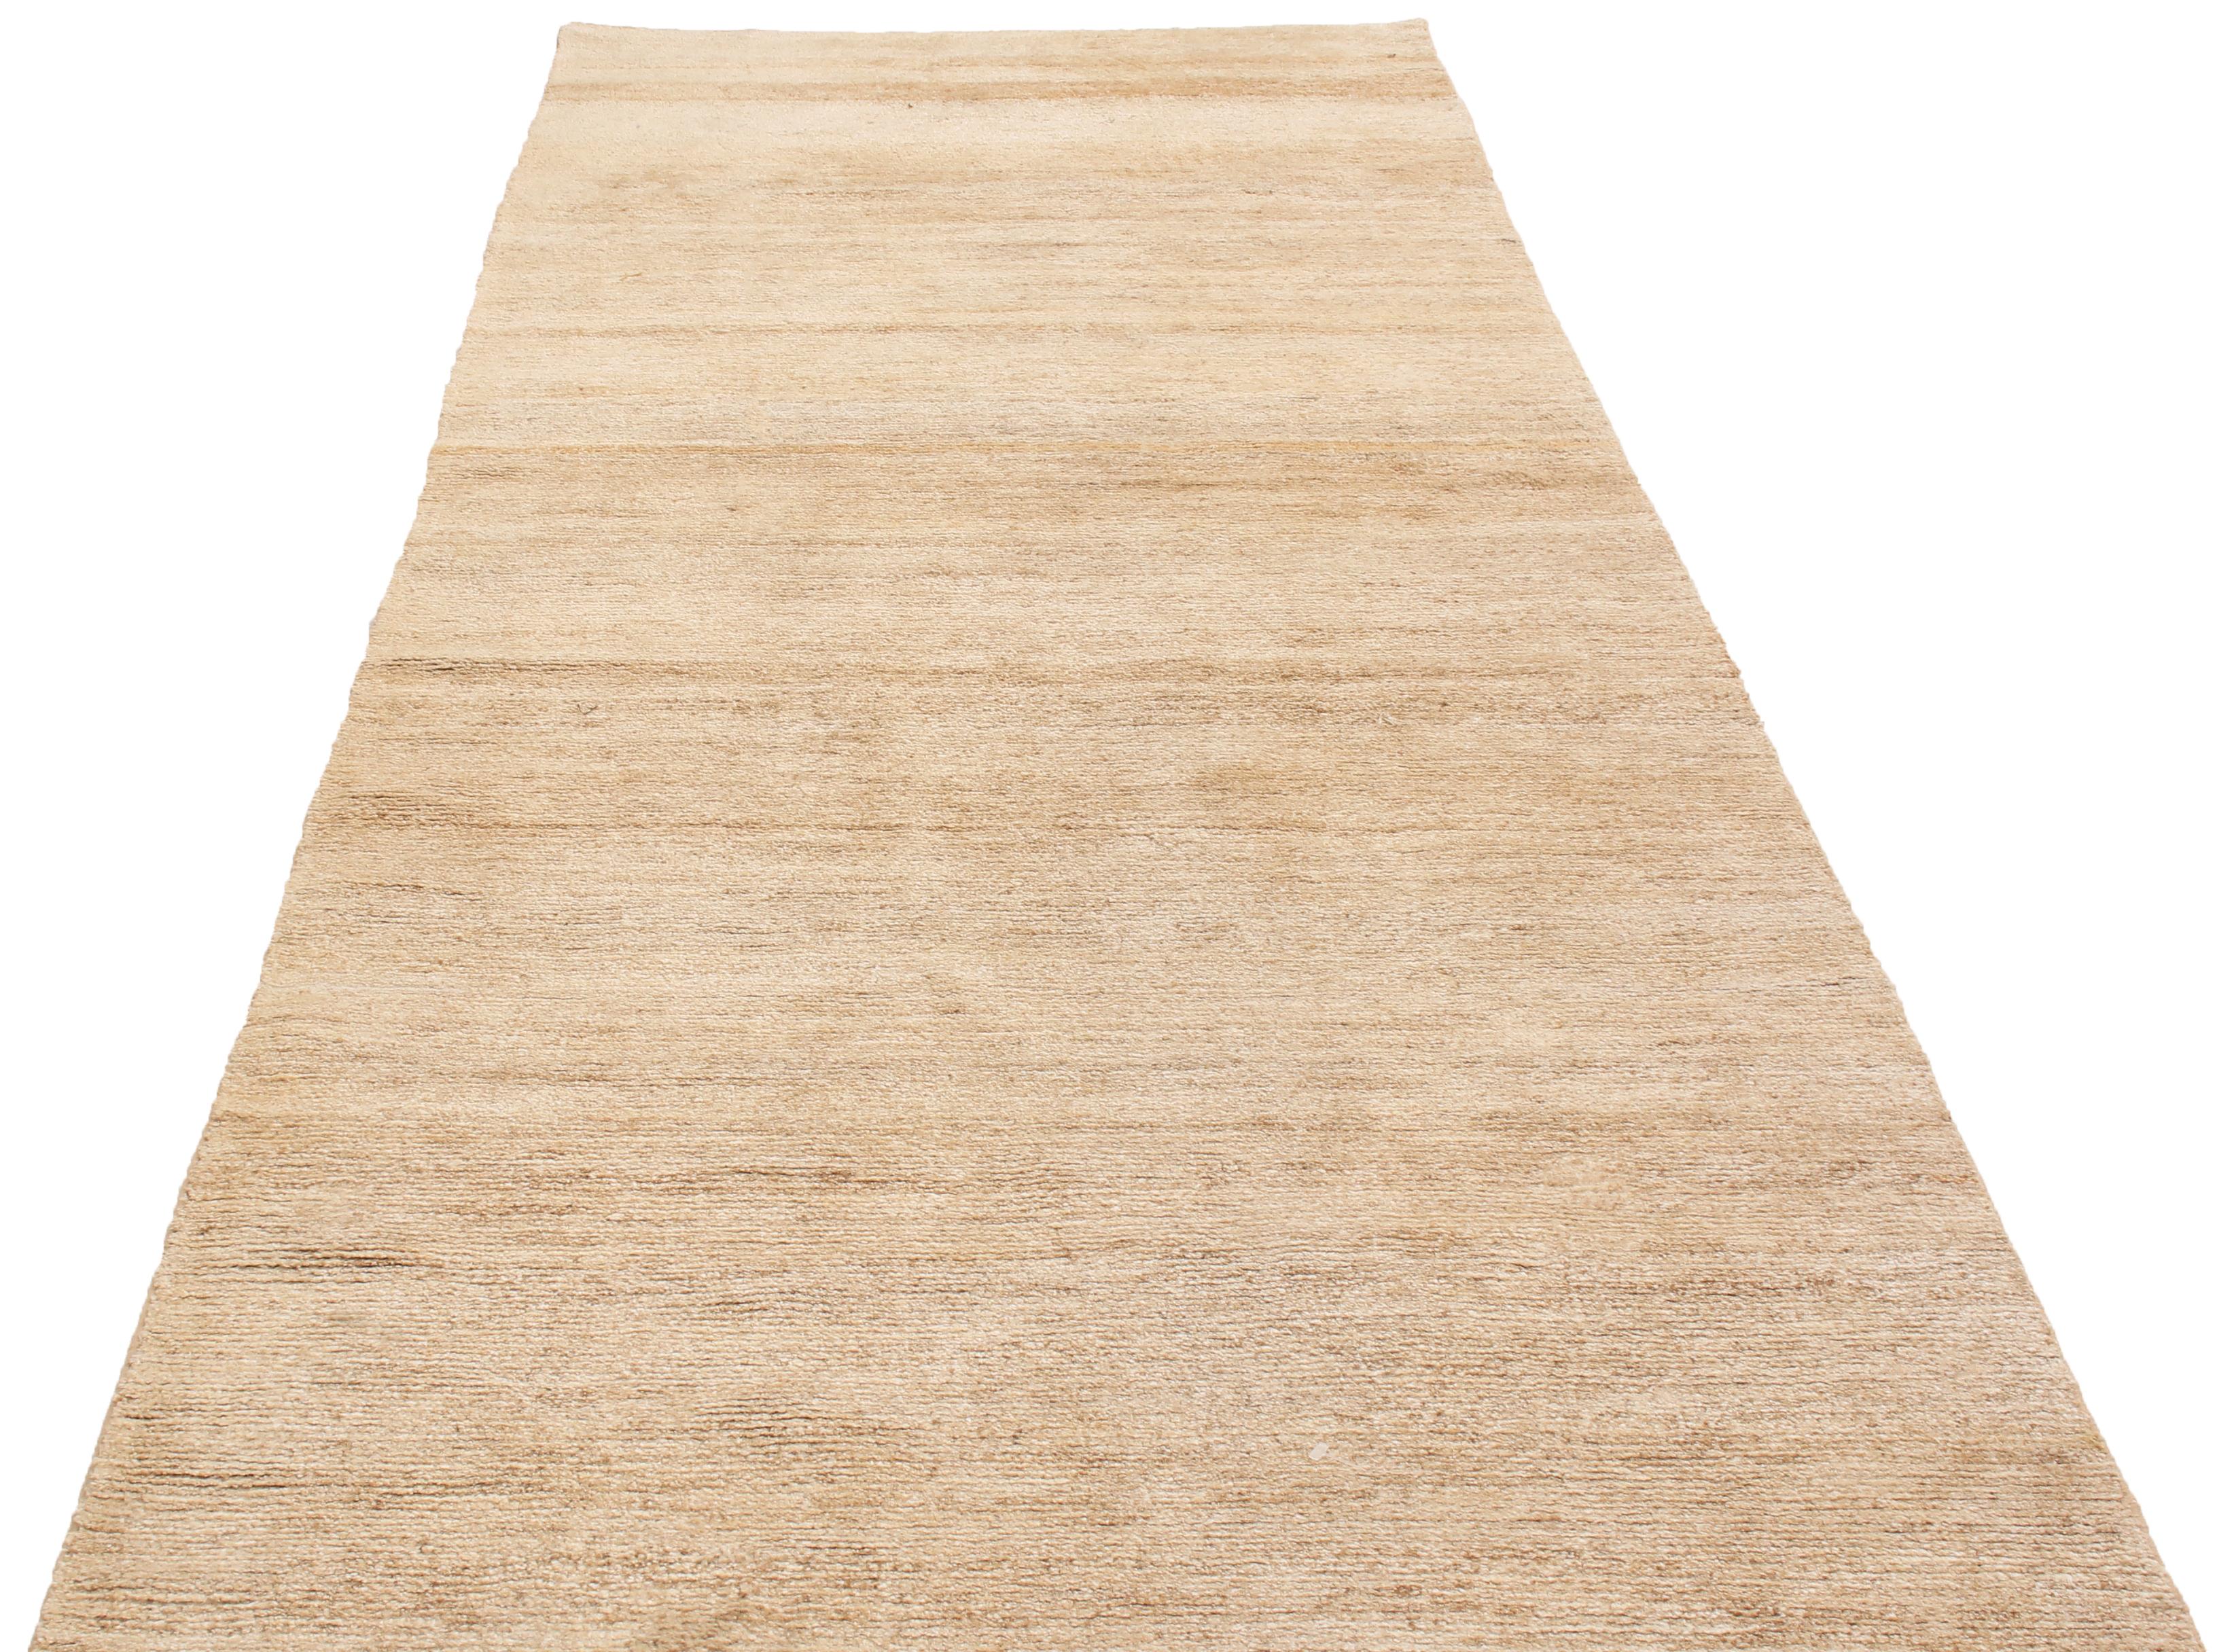 Originating from India, this contemporary high-quality hemp runner sports an inviting horizontal texture complemented by the marriage of muted sky blue and tan beige colorways for a luminous, spacious portrait.